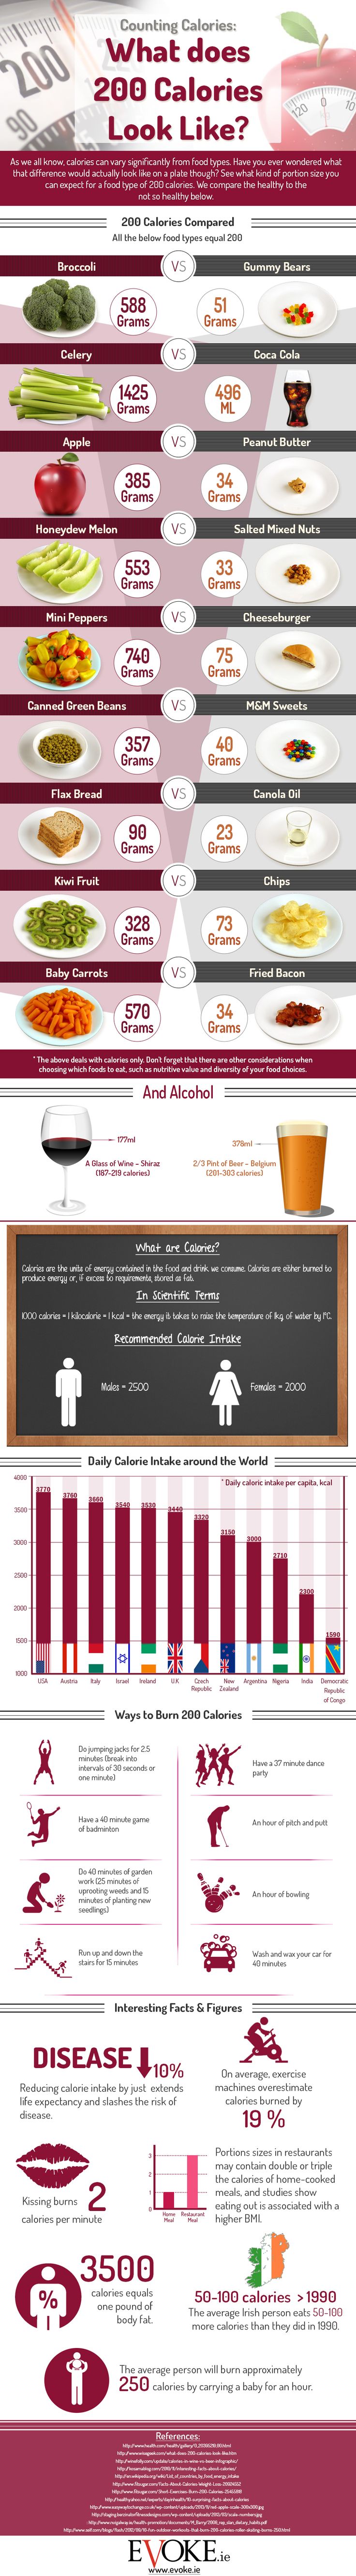 What does 200 Calories Look Like? (Infographic)